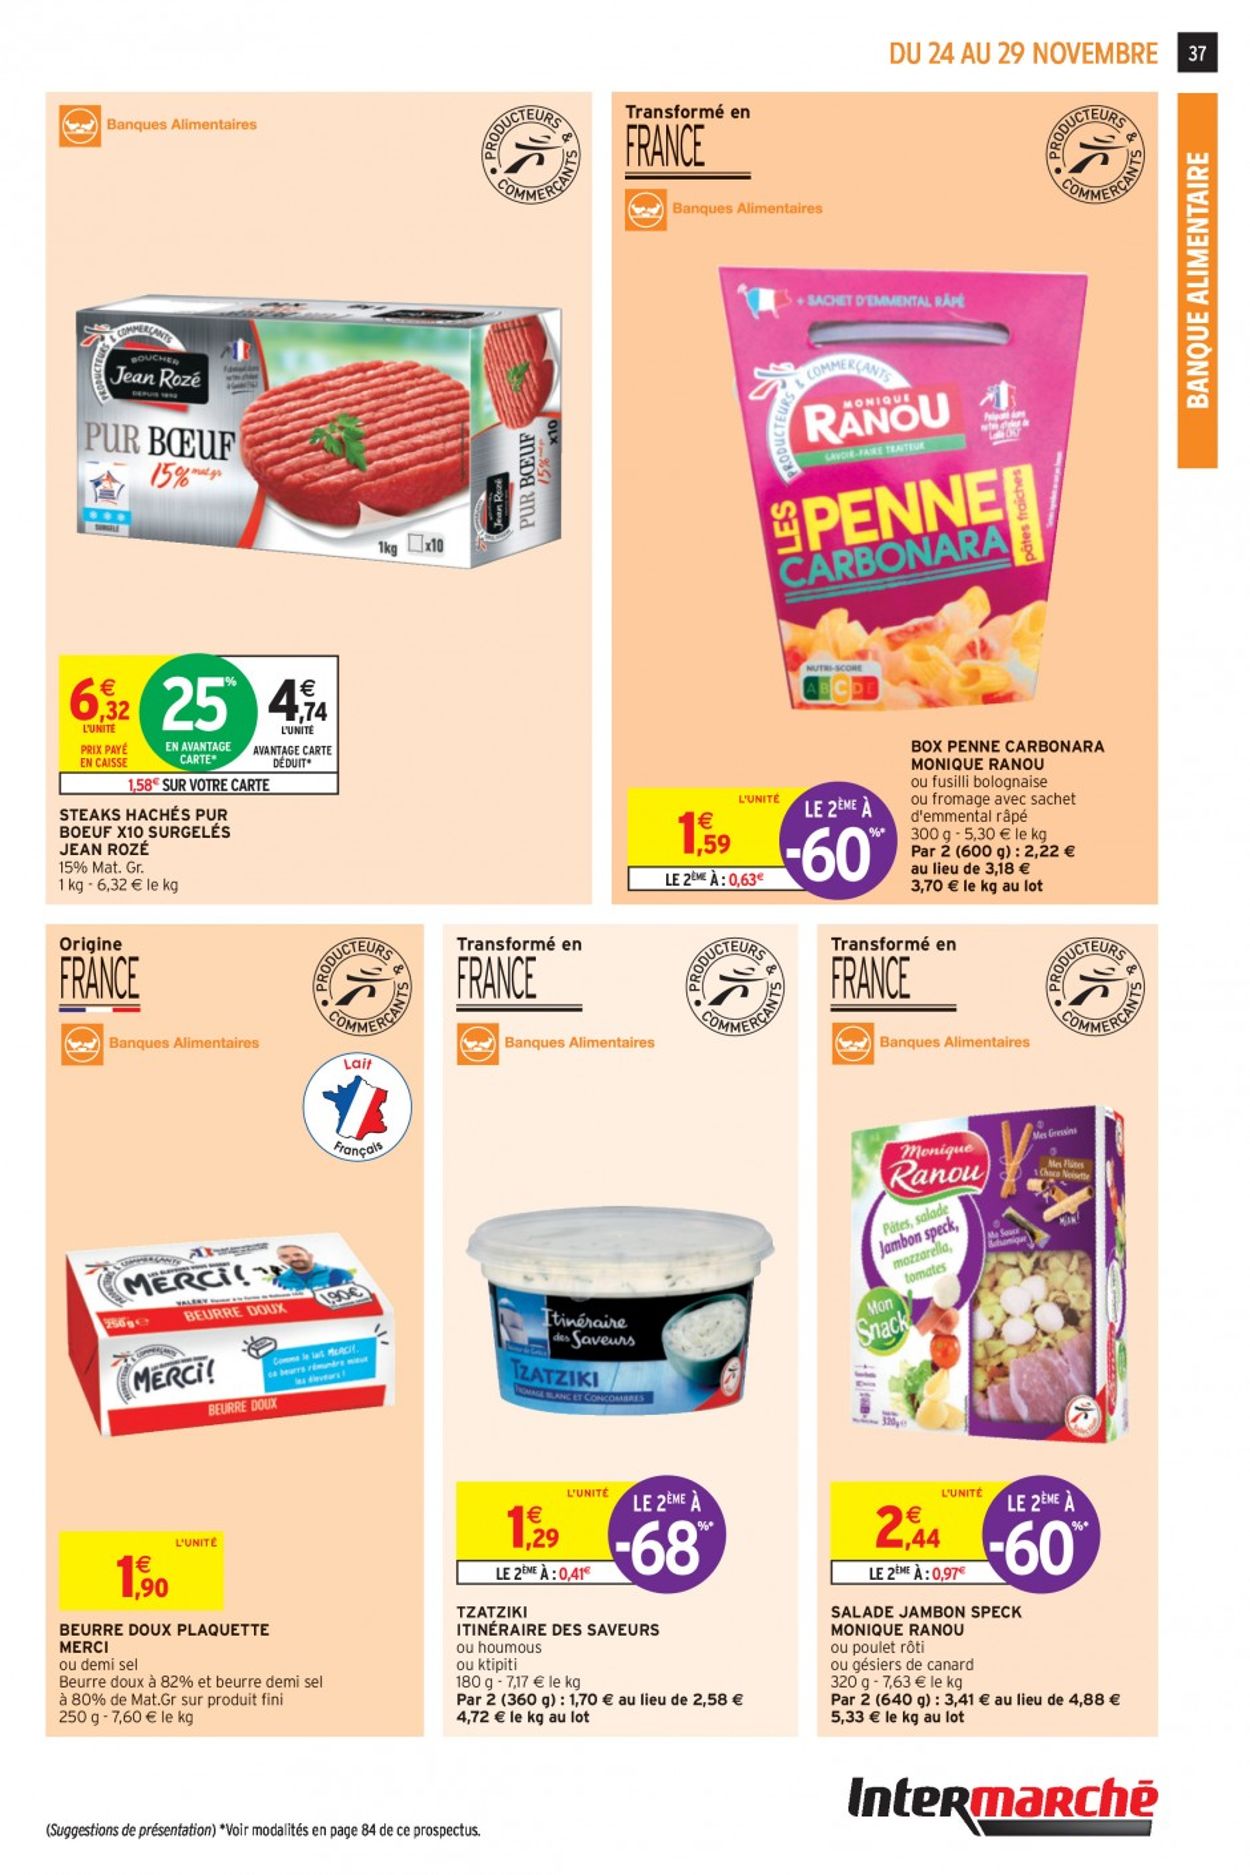 Intermarché Black Friday 2020 Catalogue - 24.11-29.11.2020 (Page 37)